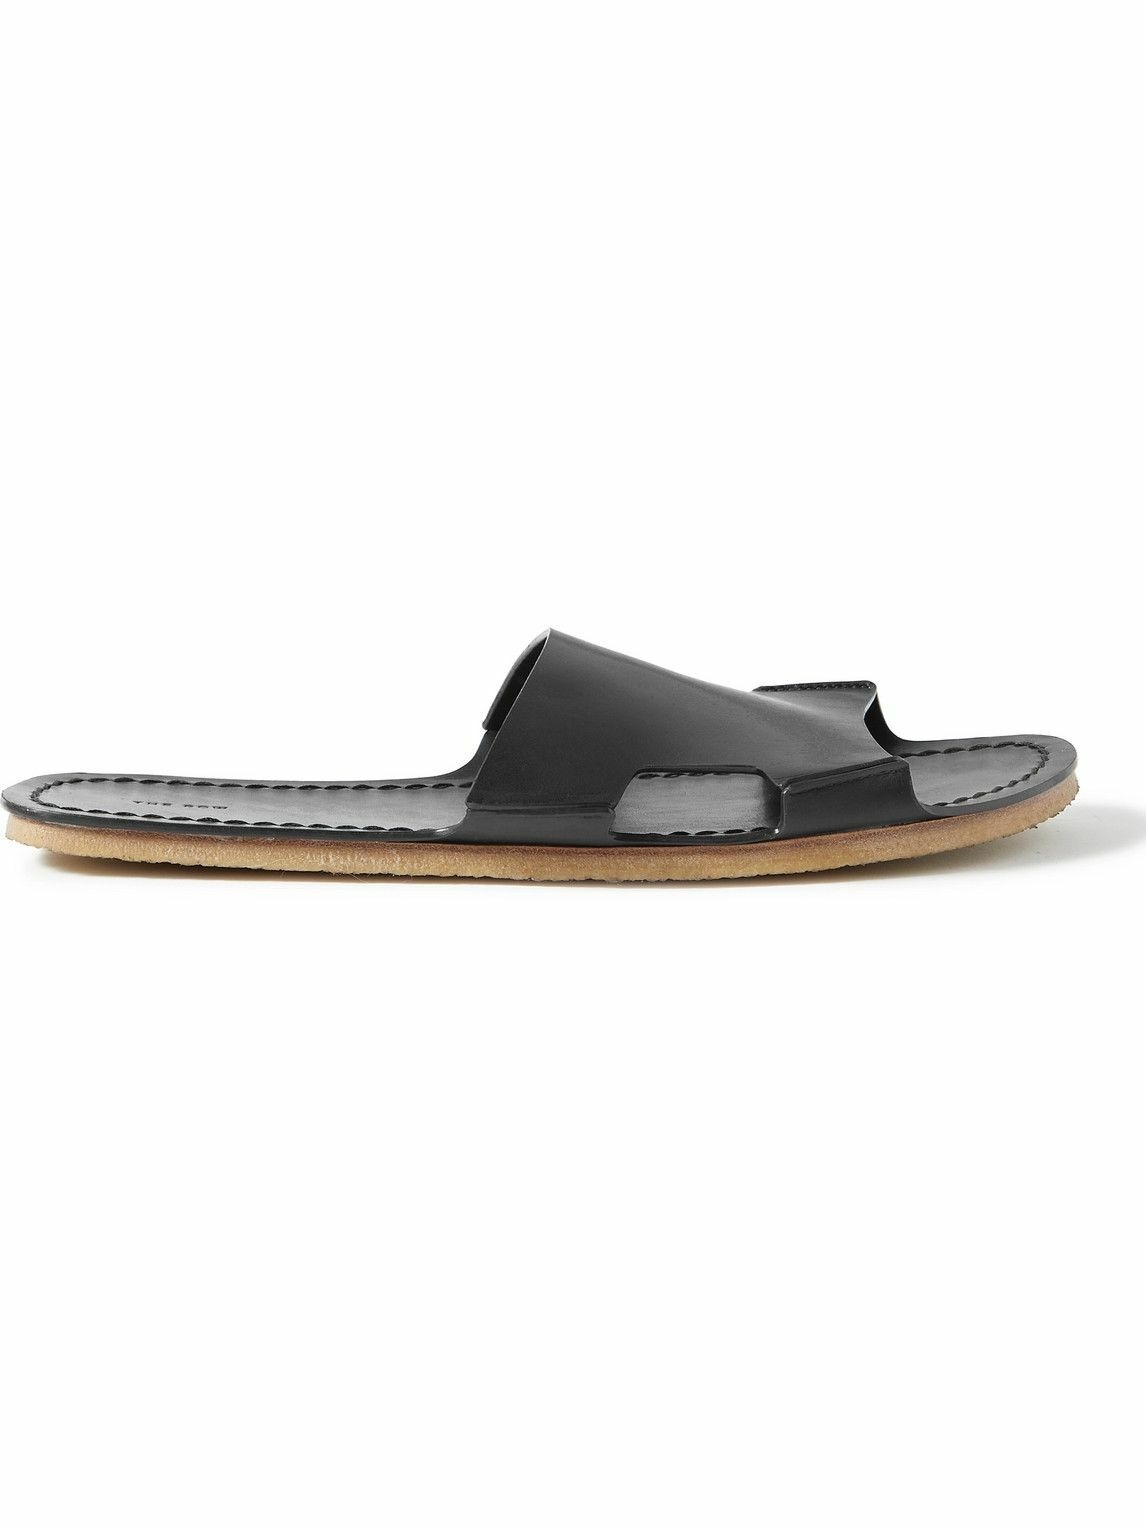 The Row - Gene Leather Slides - Black The Row